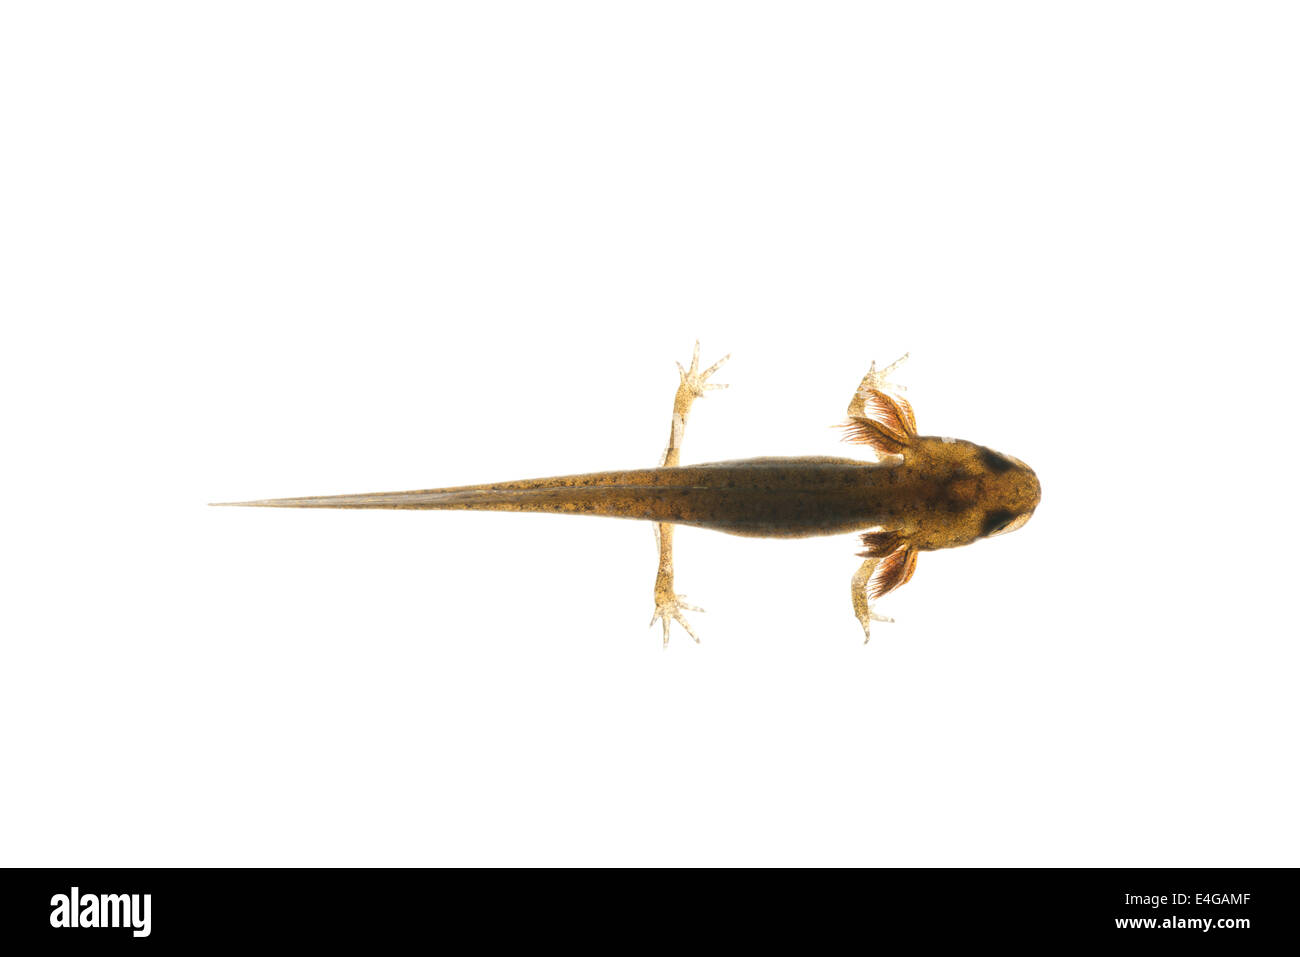 common smooth newt advanced larvae legs developing with external feathery gills will leave pond late summer or autumn 27 mm long Stock Photo